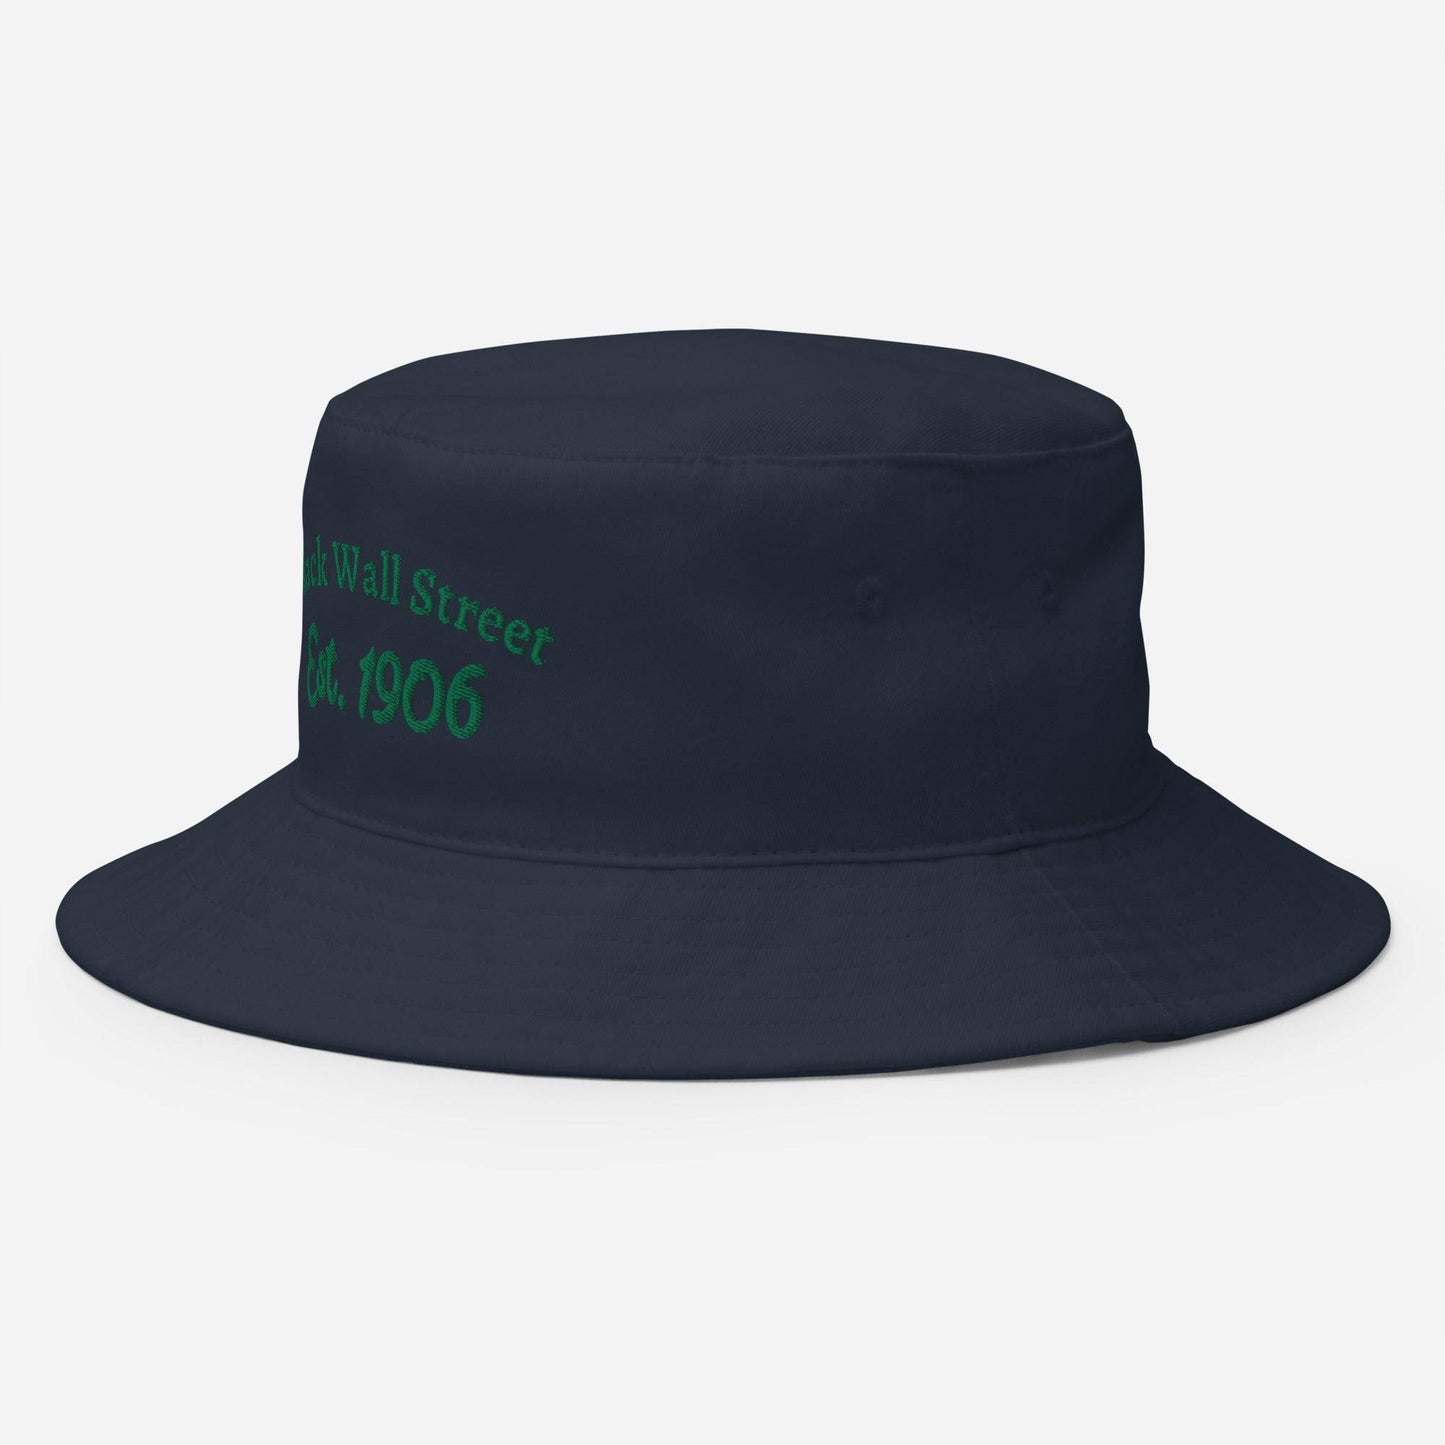 navy bucket hat with black wall street est 1906 embroider on it